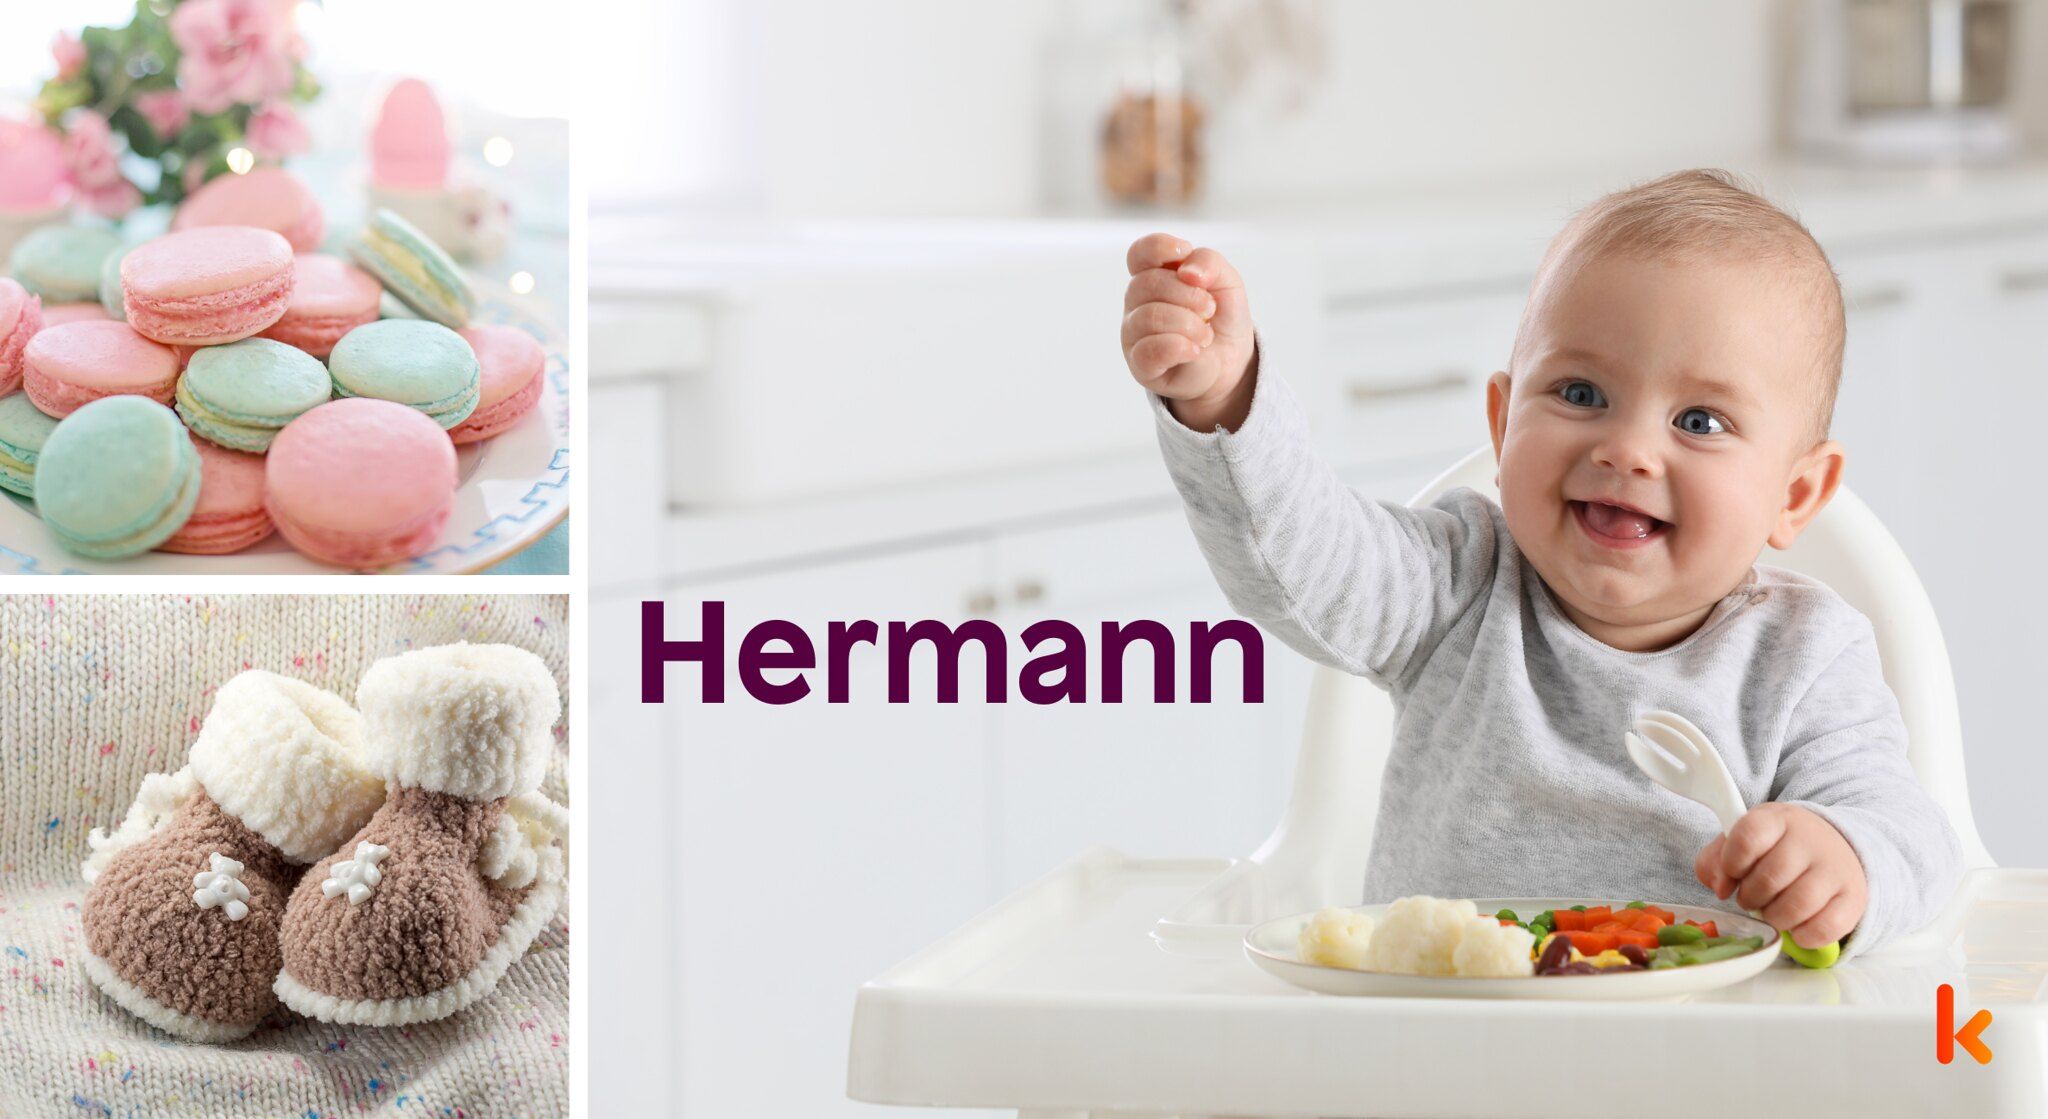 Meaning of the name Hermann